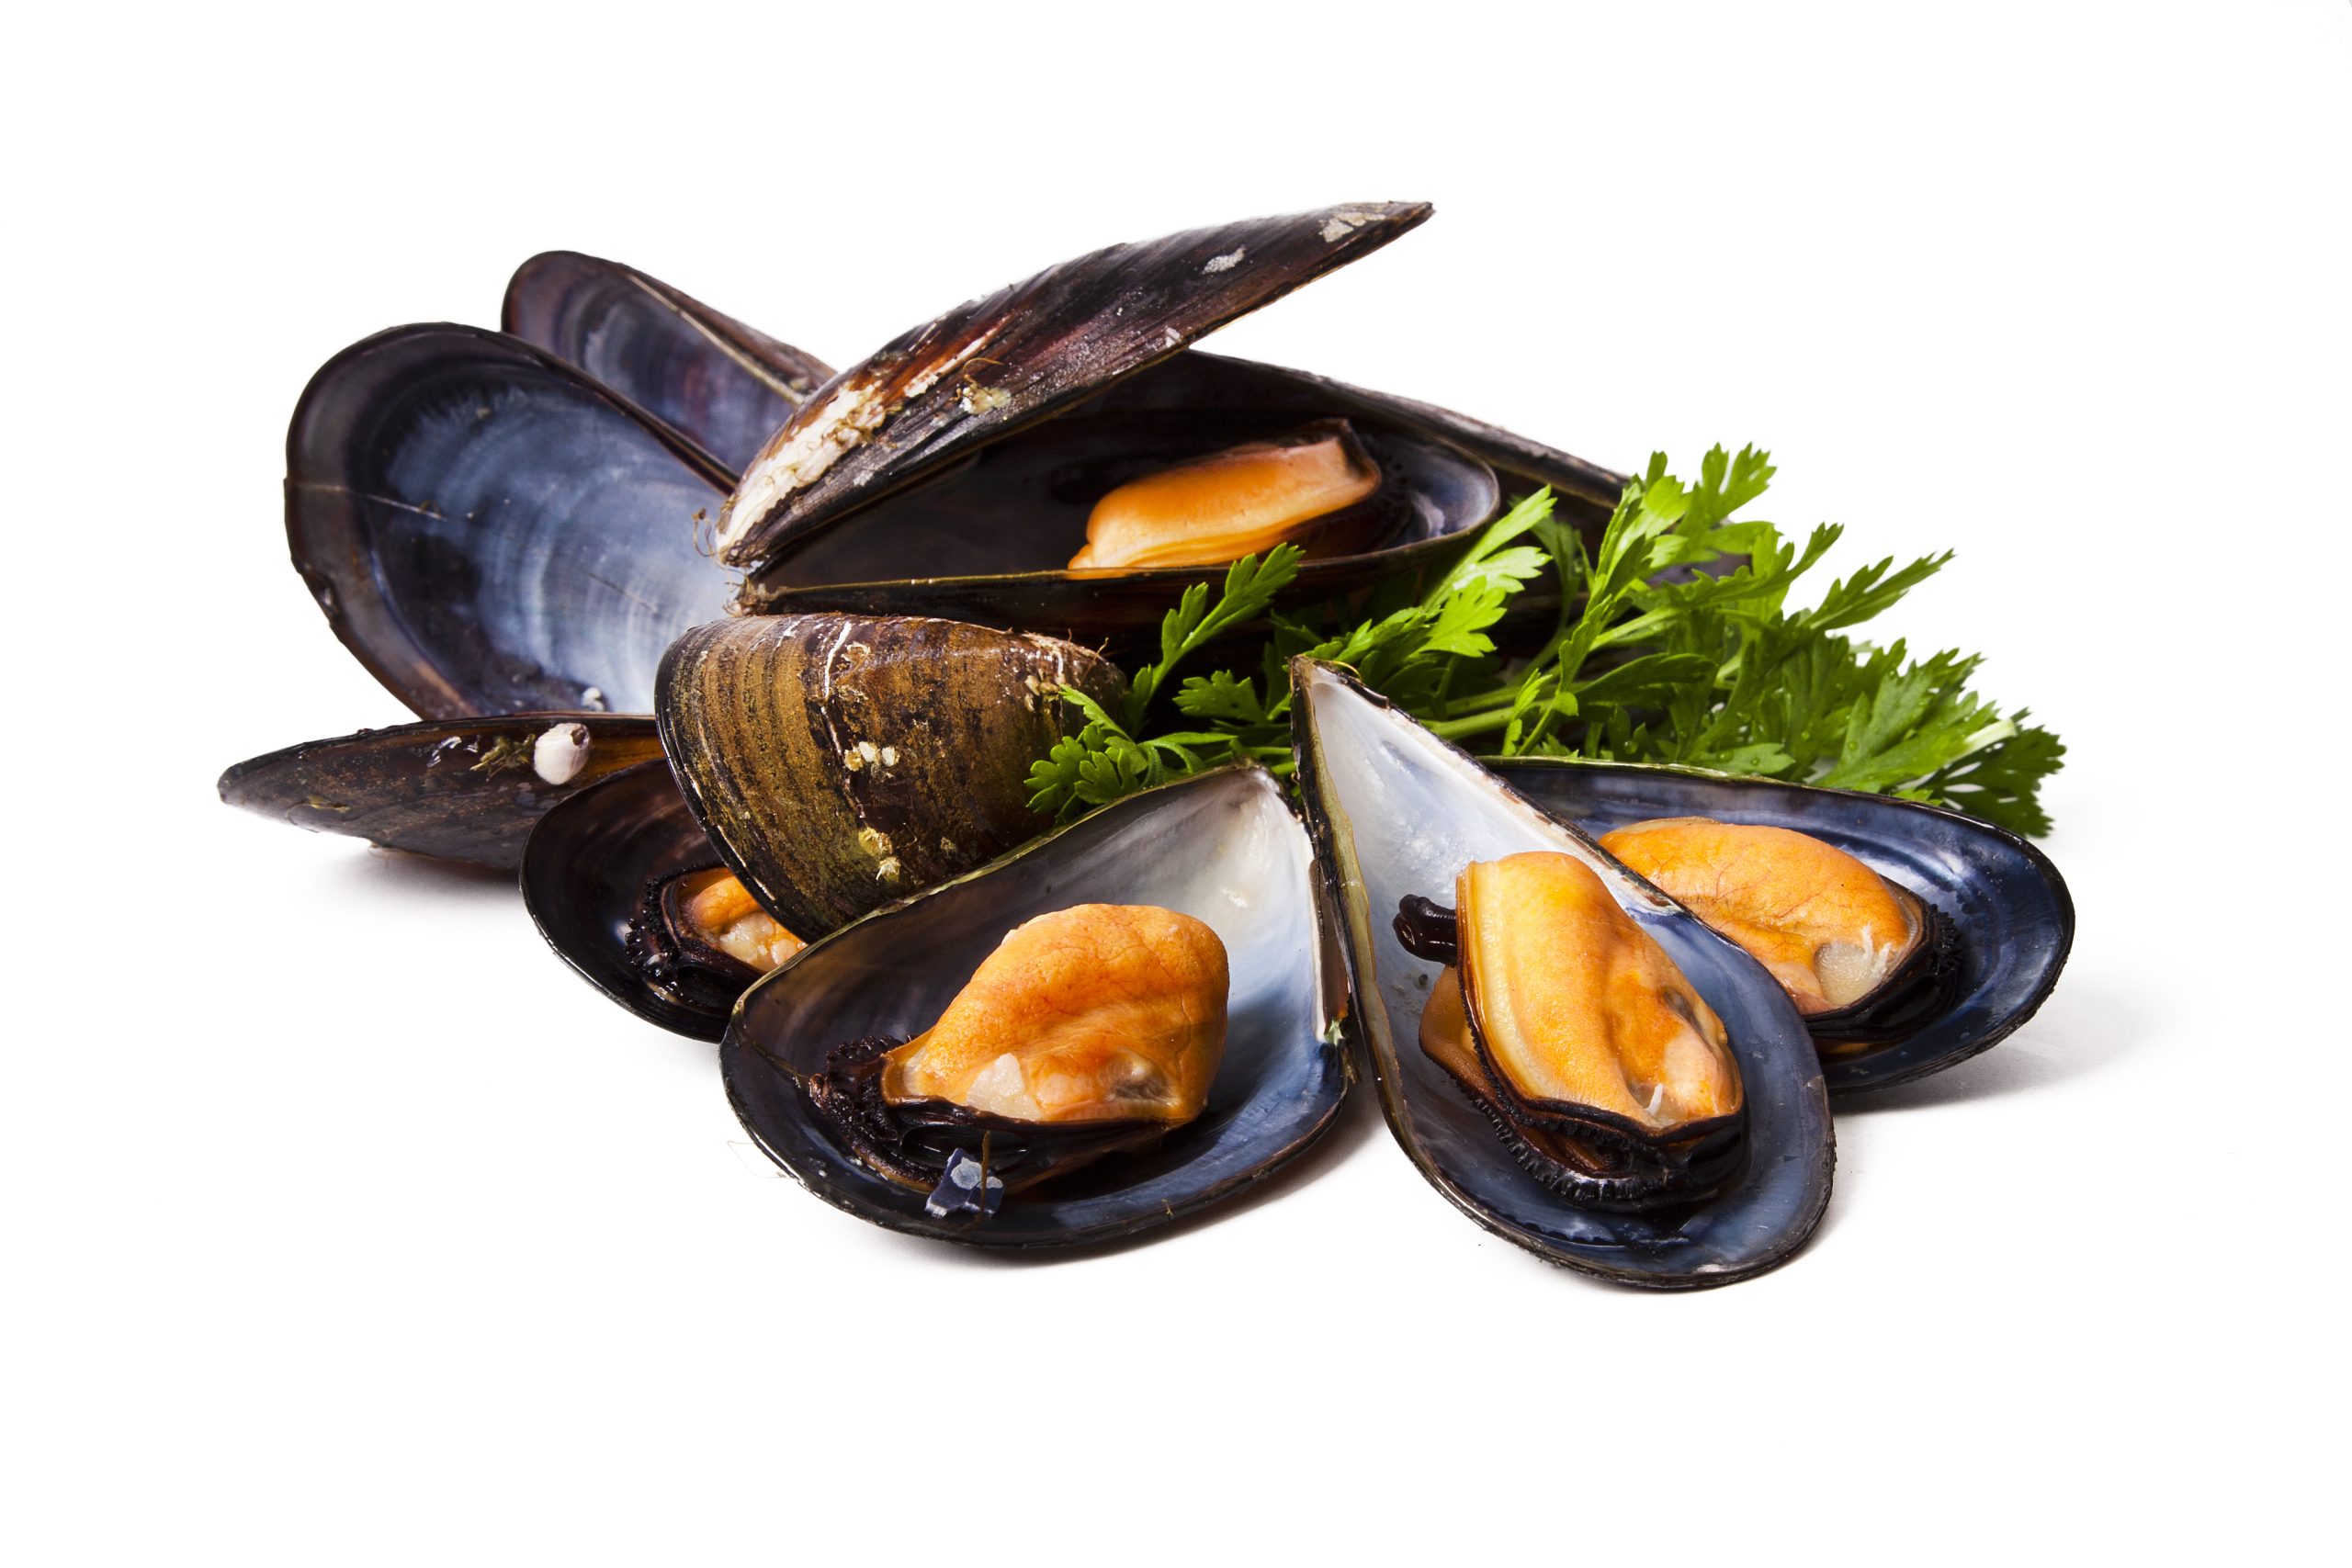 Whole Mussels